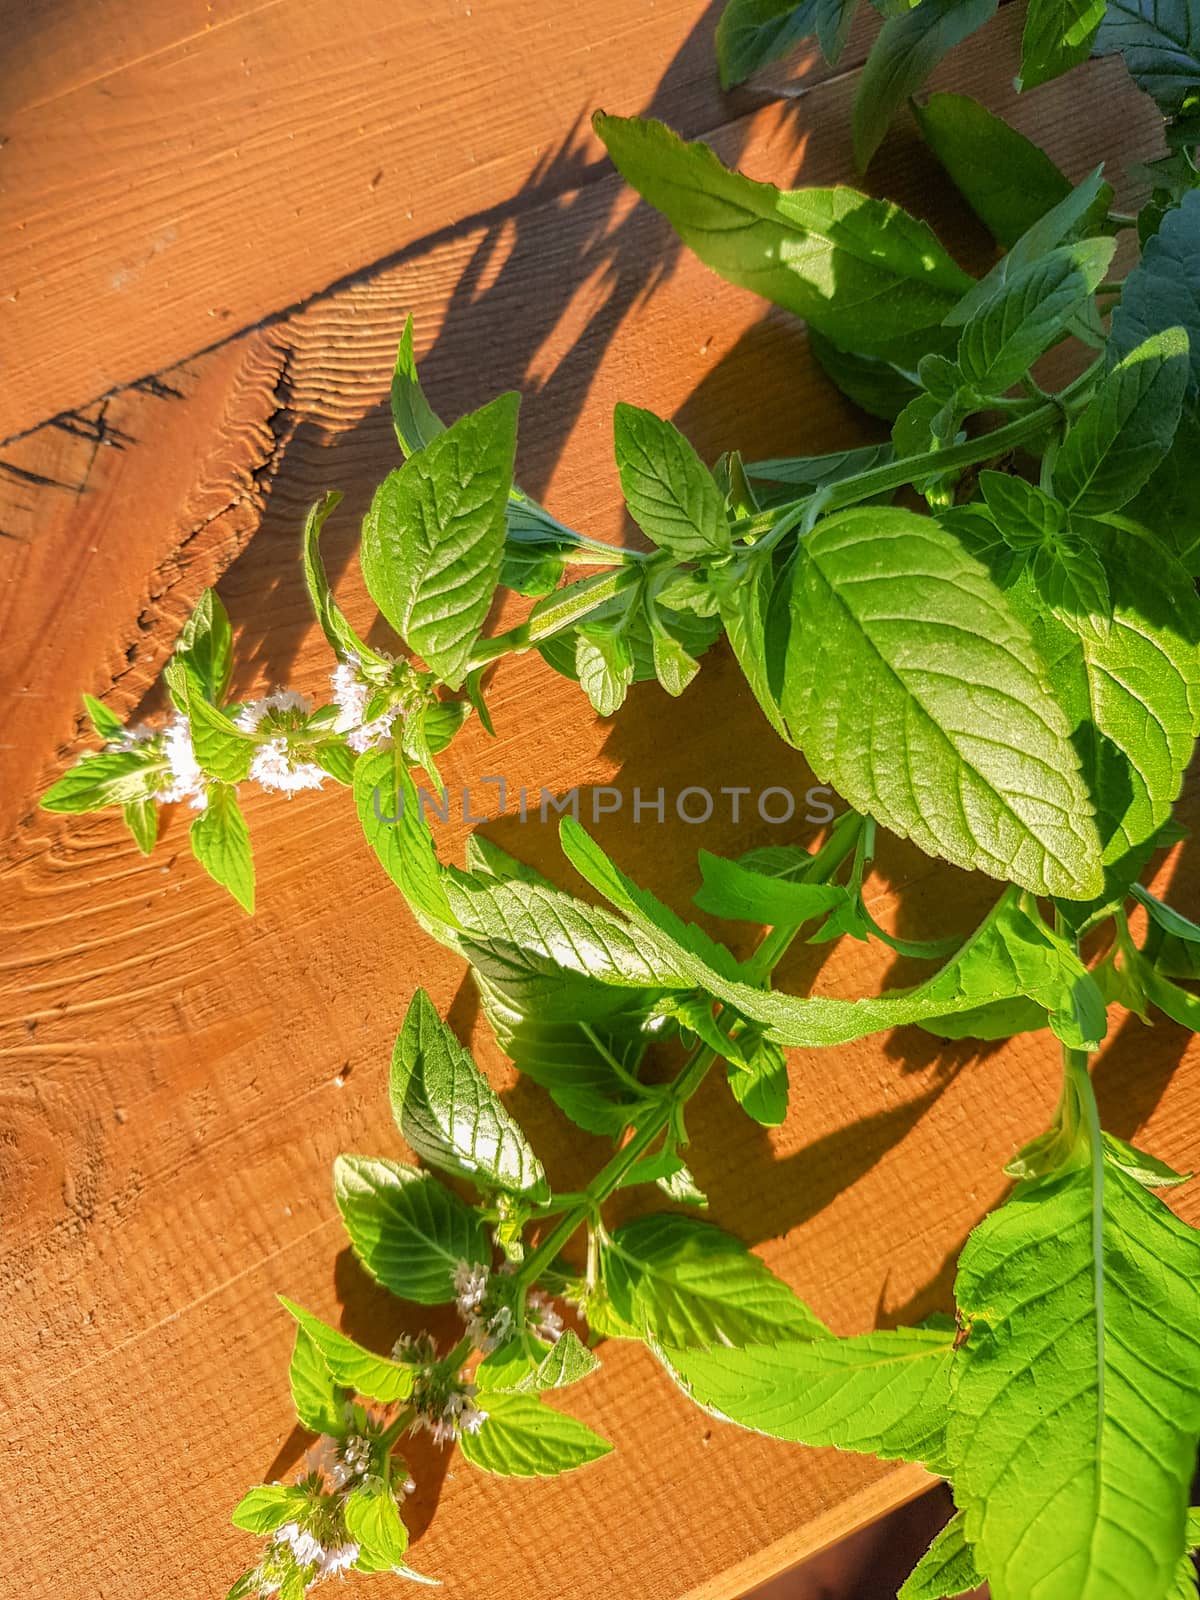 Blooming sprig of mint on a wooden background, evening Sunny Golden light, outdoor, close-up, romantic by claire_lucia